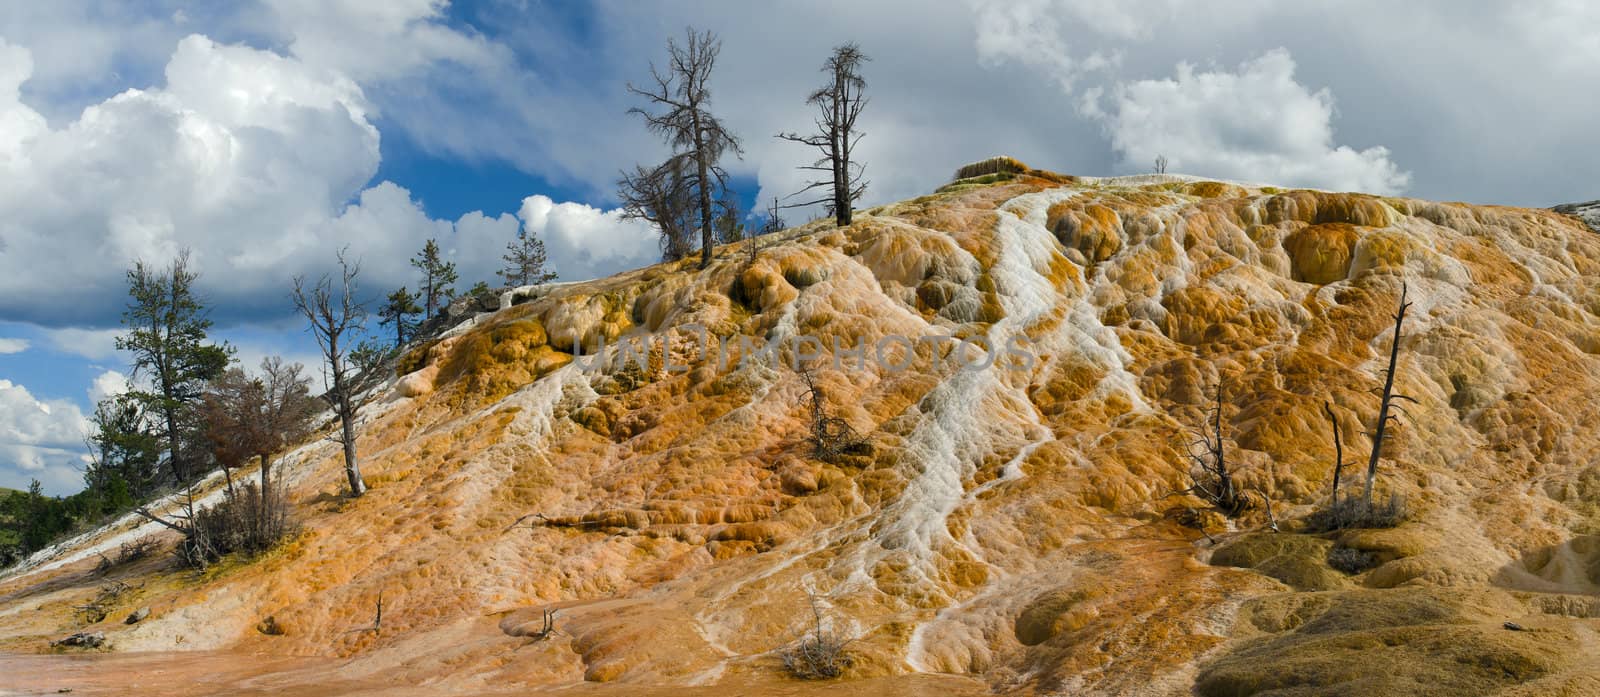 Panorama of travertine (limestone) mound formed by mineral deposition from hot springs, Palette Springs, Yellowstone National Park, Wyoming, USA by CharlesBolin